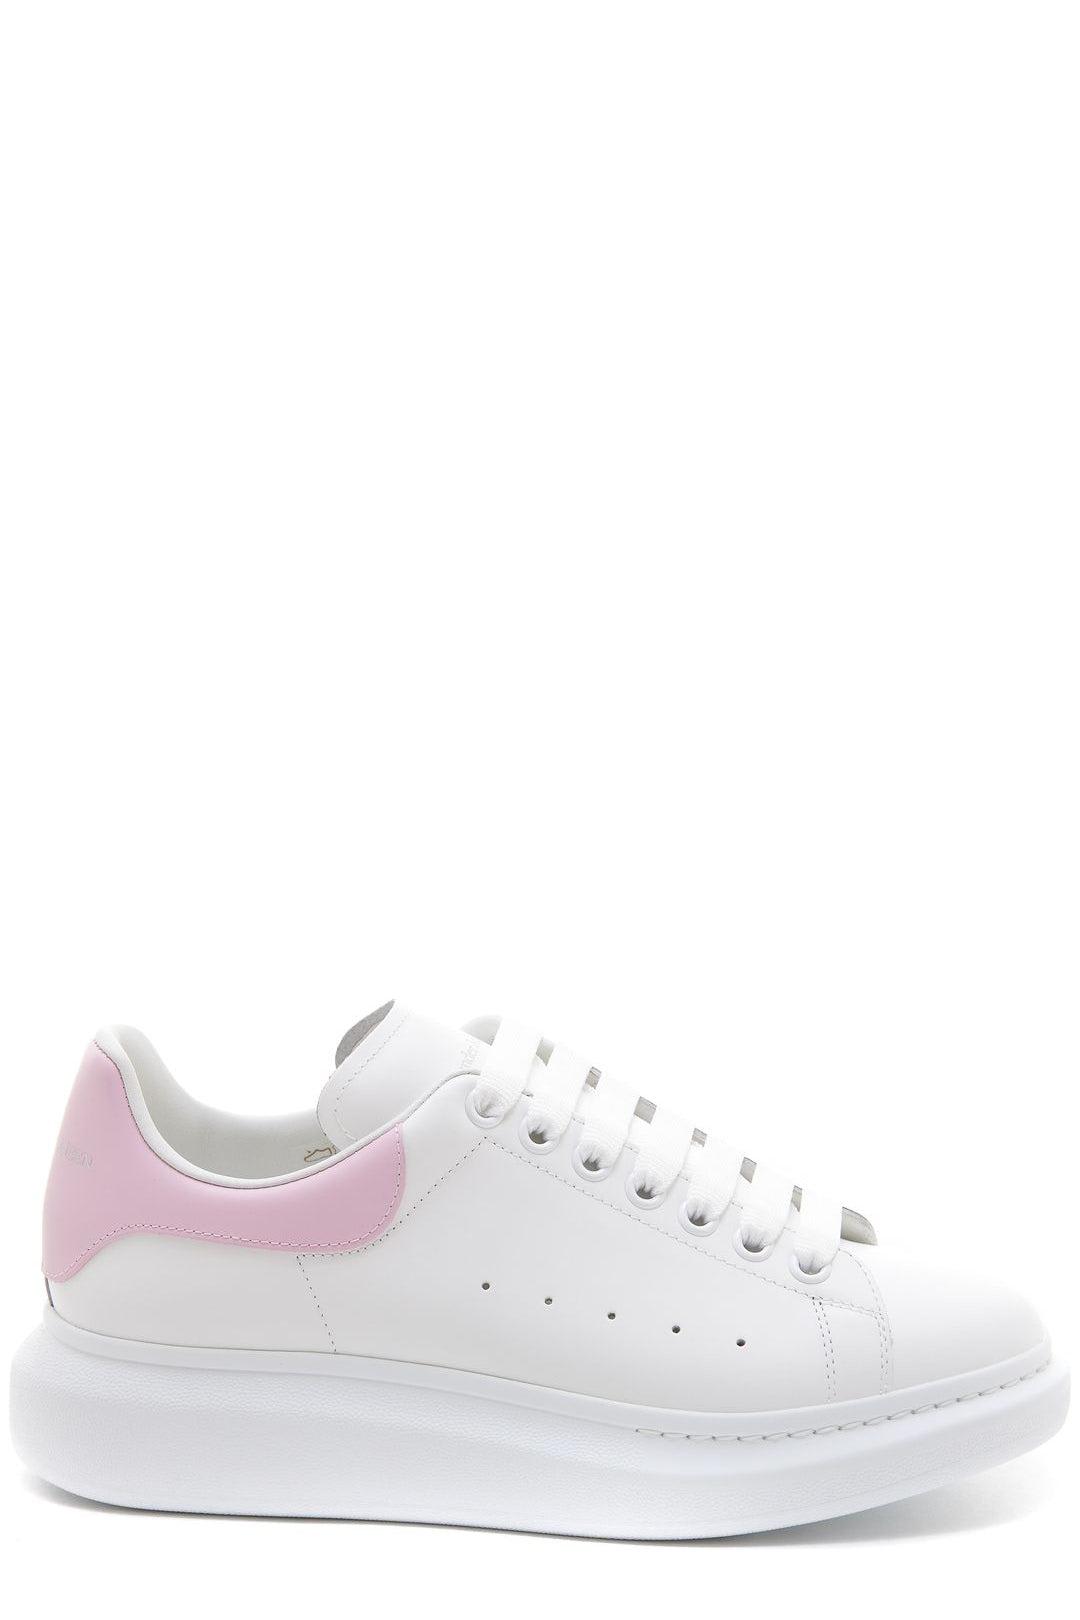 Alexander McQueen Logo Printed Lace-up Sneakers